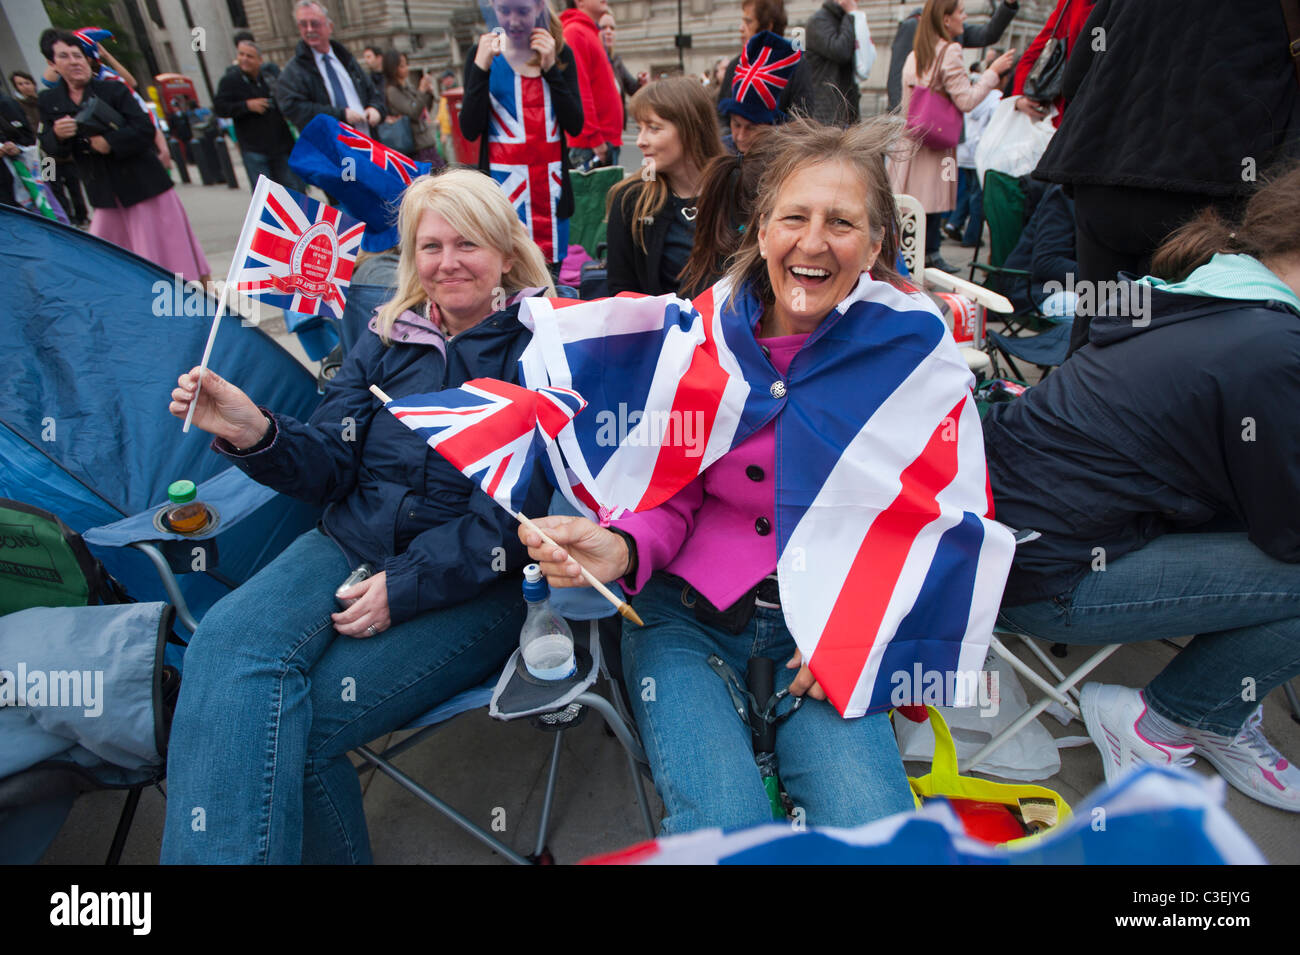 People camping out along the route of the Royal Wedding procession of Prince William and Kate Middleton, London 2011. Stock Photo